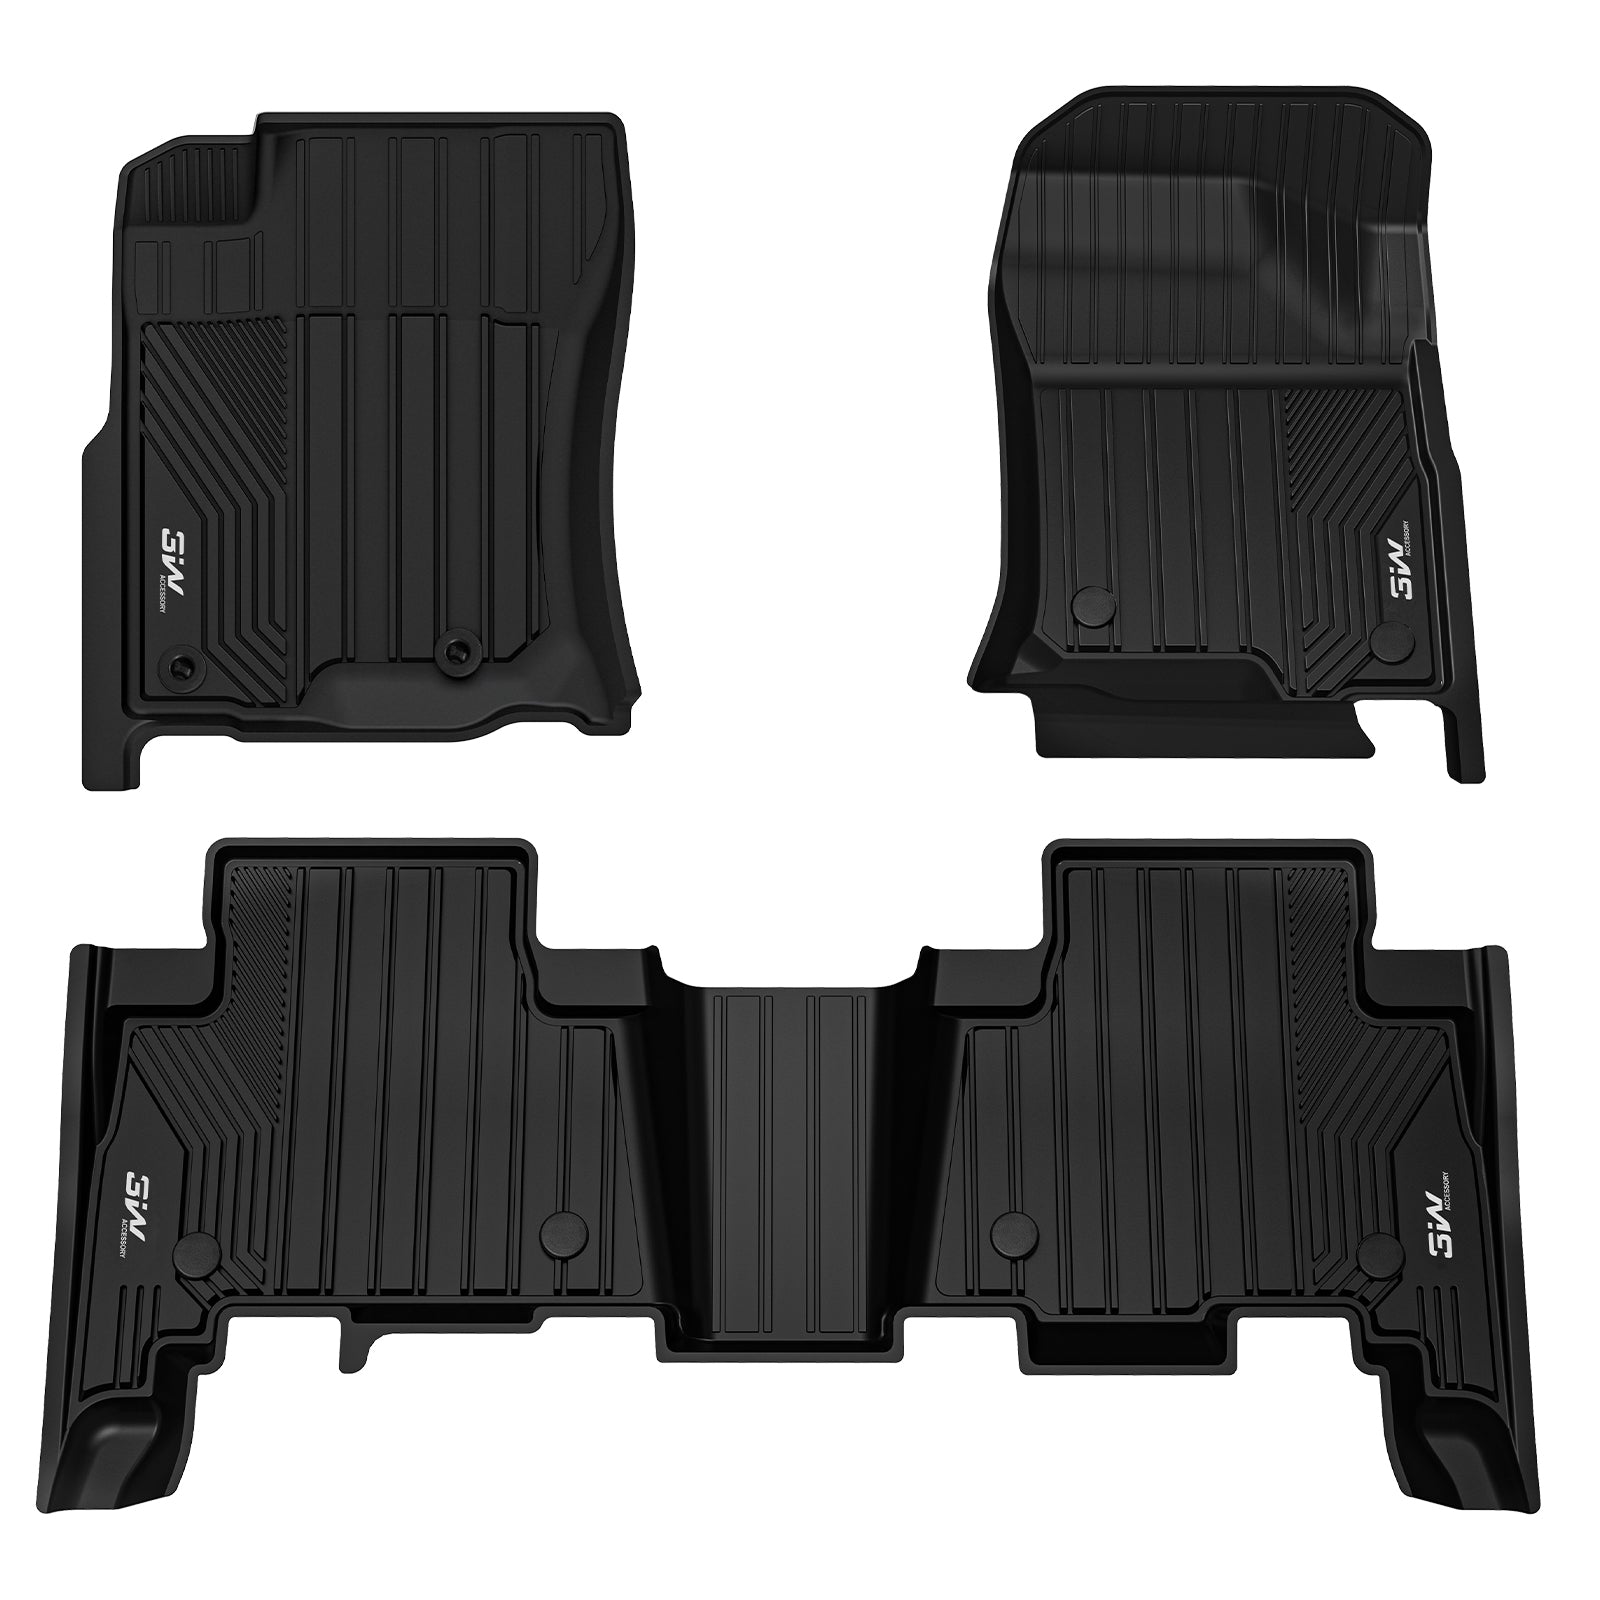 3W LEXUS GX460 2014-2023 (Only for 5 Seats) Custom Floor Mats TPE Material & All-Weather Protection Vehicles & Parts 3Wliners 2014-2023 GX460 2014-2023 1st&2nd Row Mats